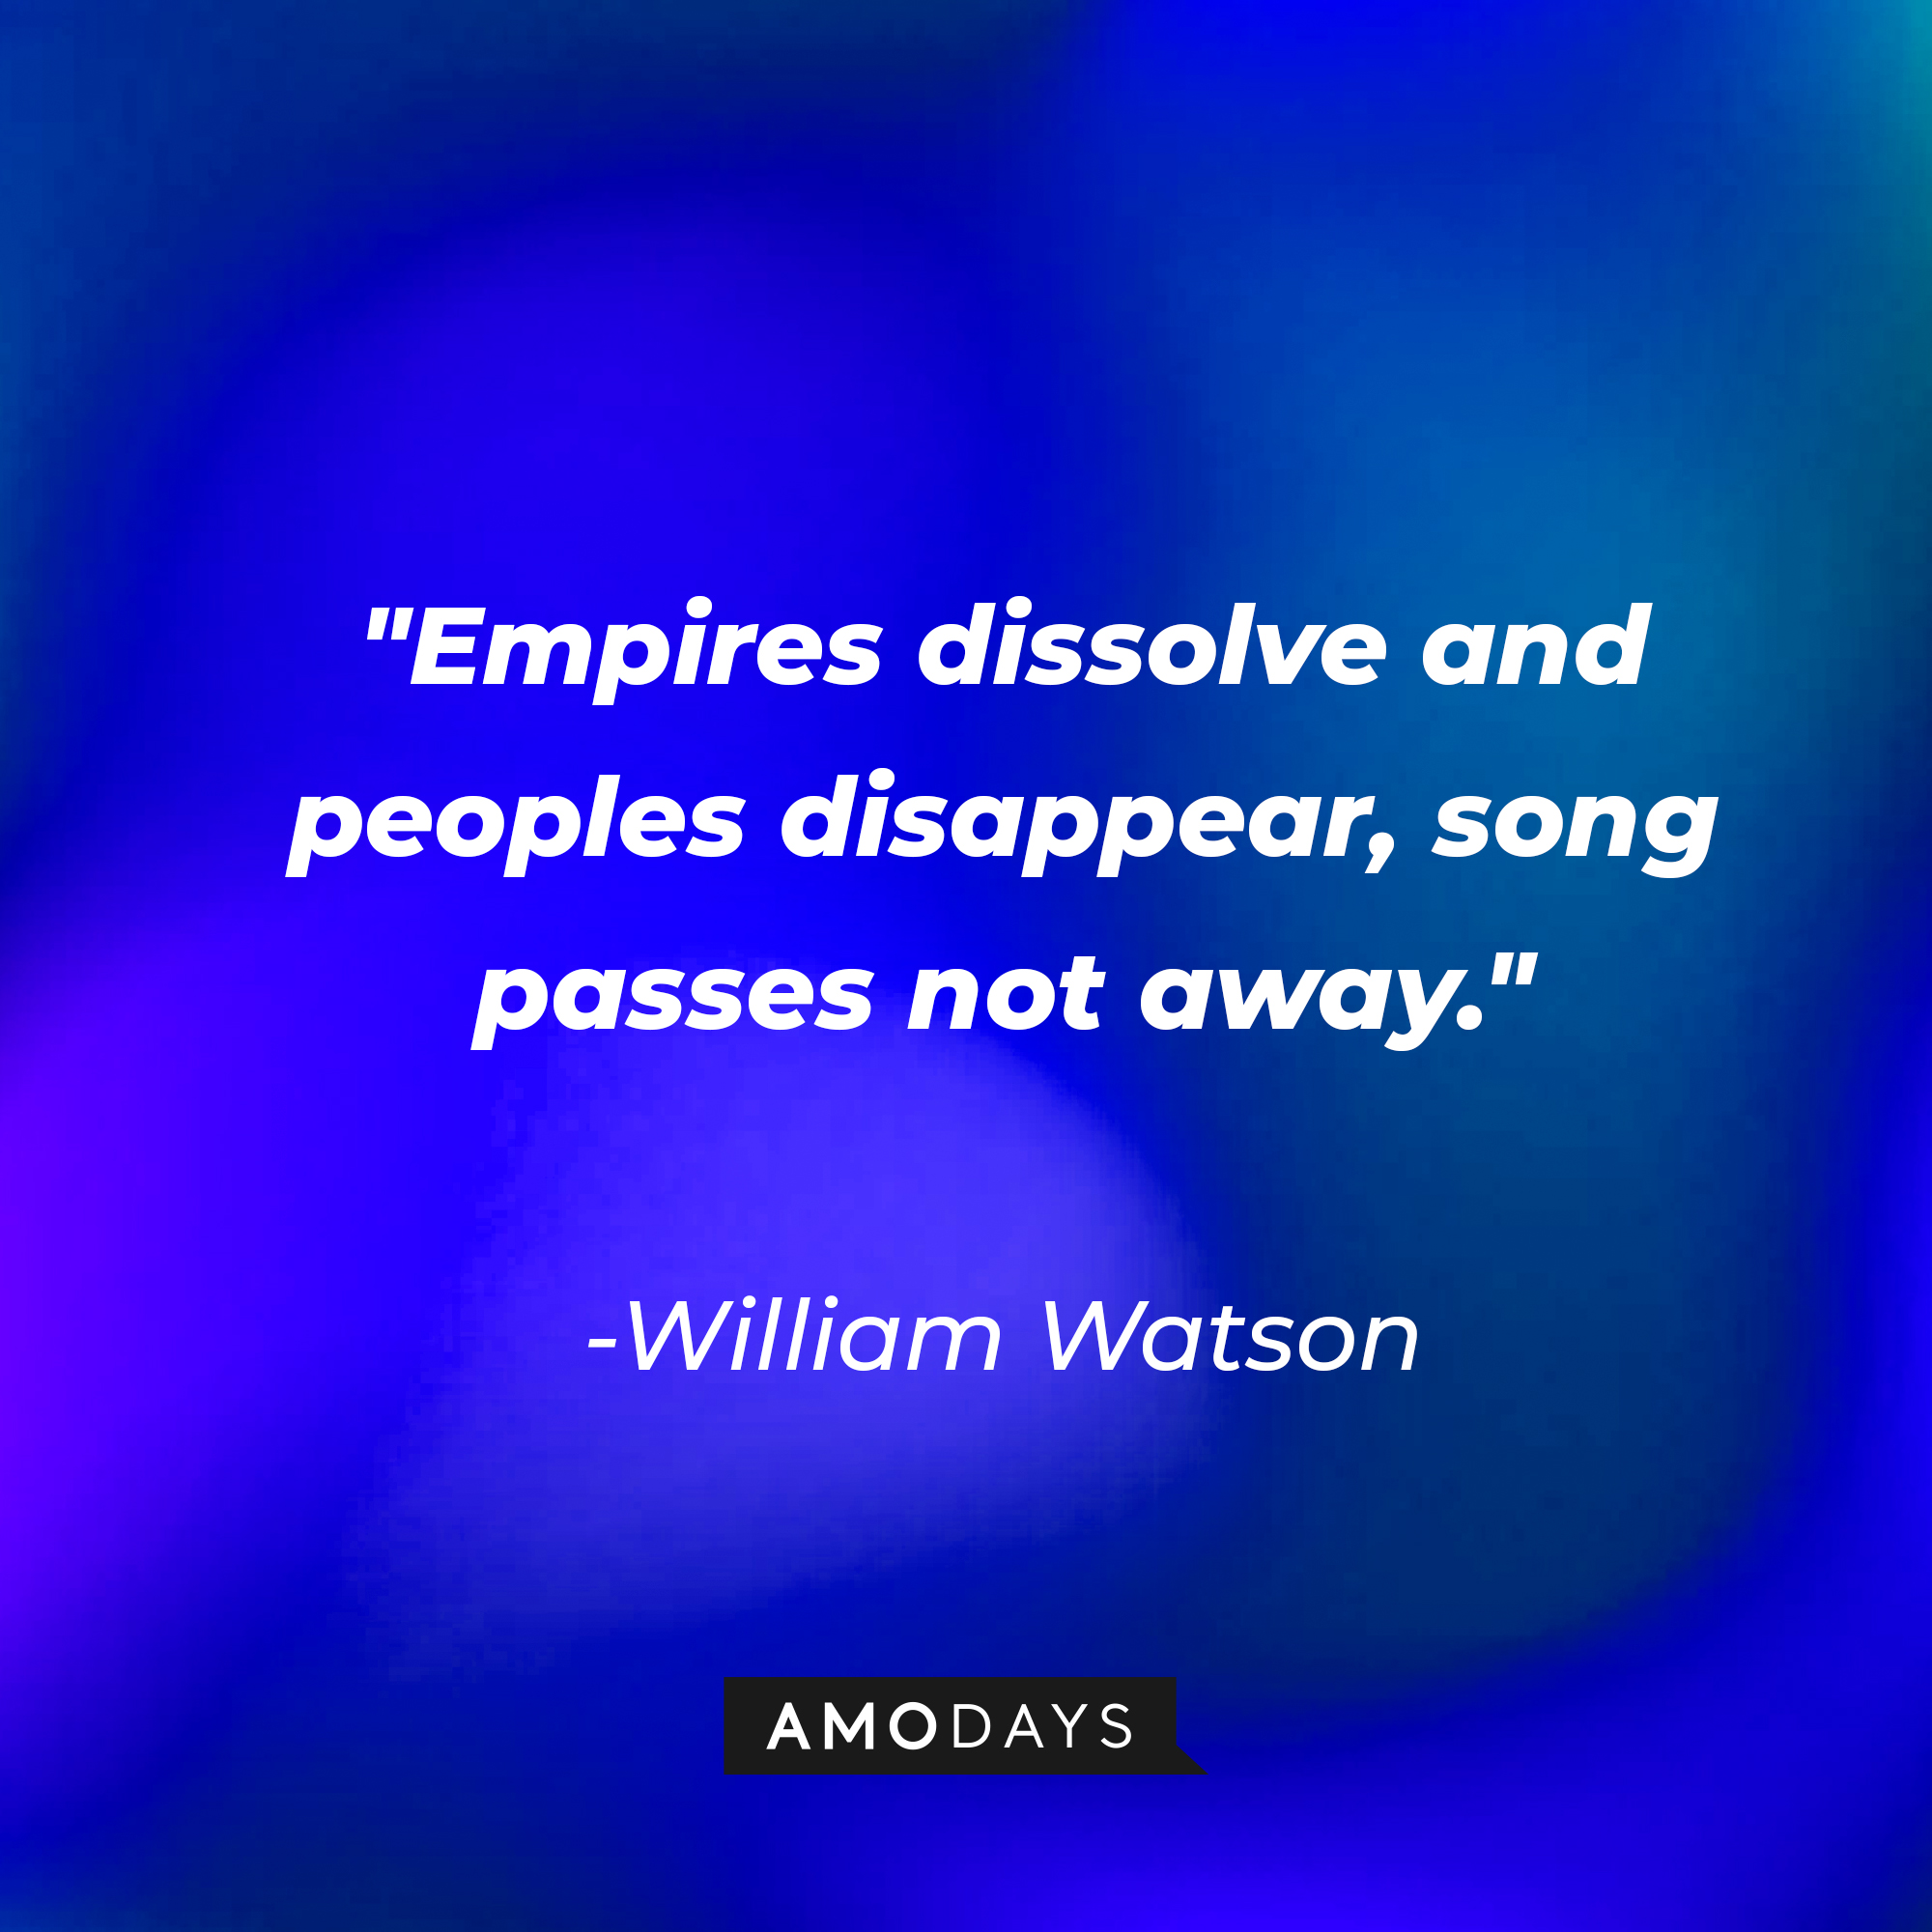 William Watson's quote: "Empires dissolve and peoples disappear, song passes not away." | Image: AmoDays